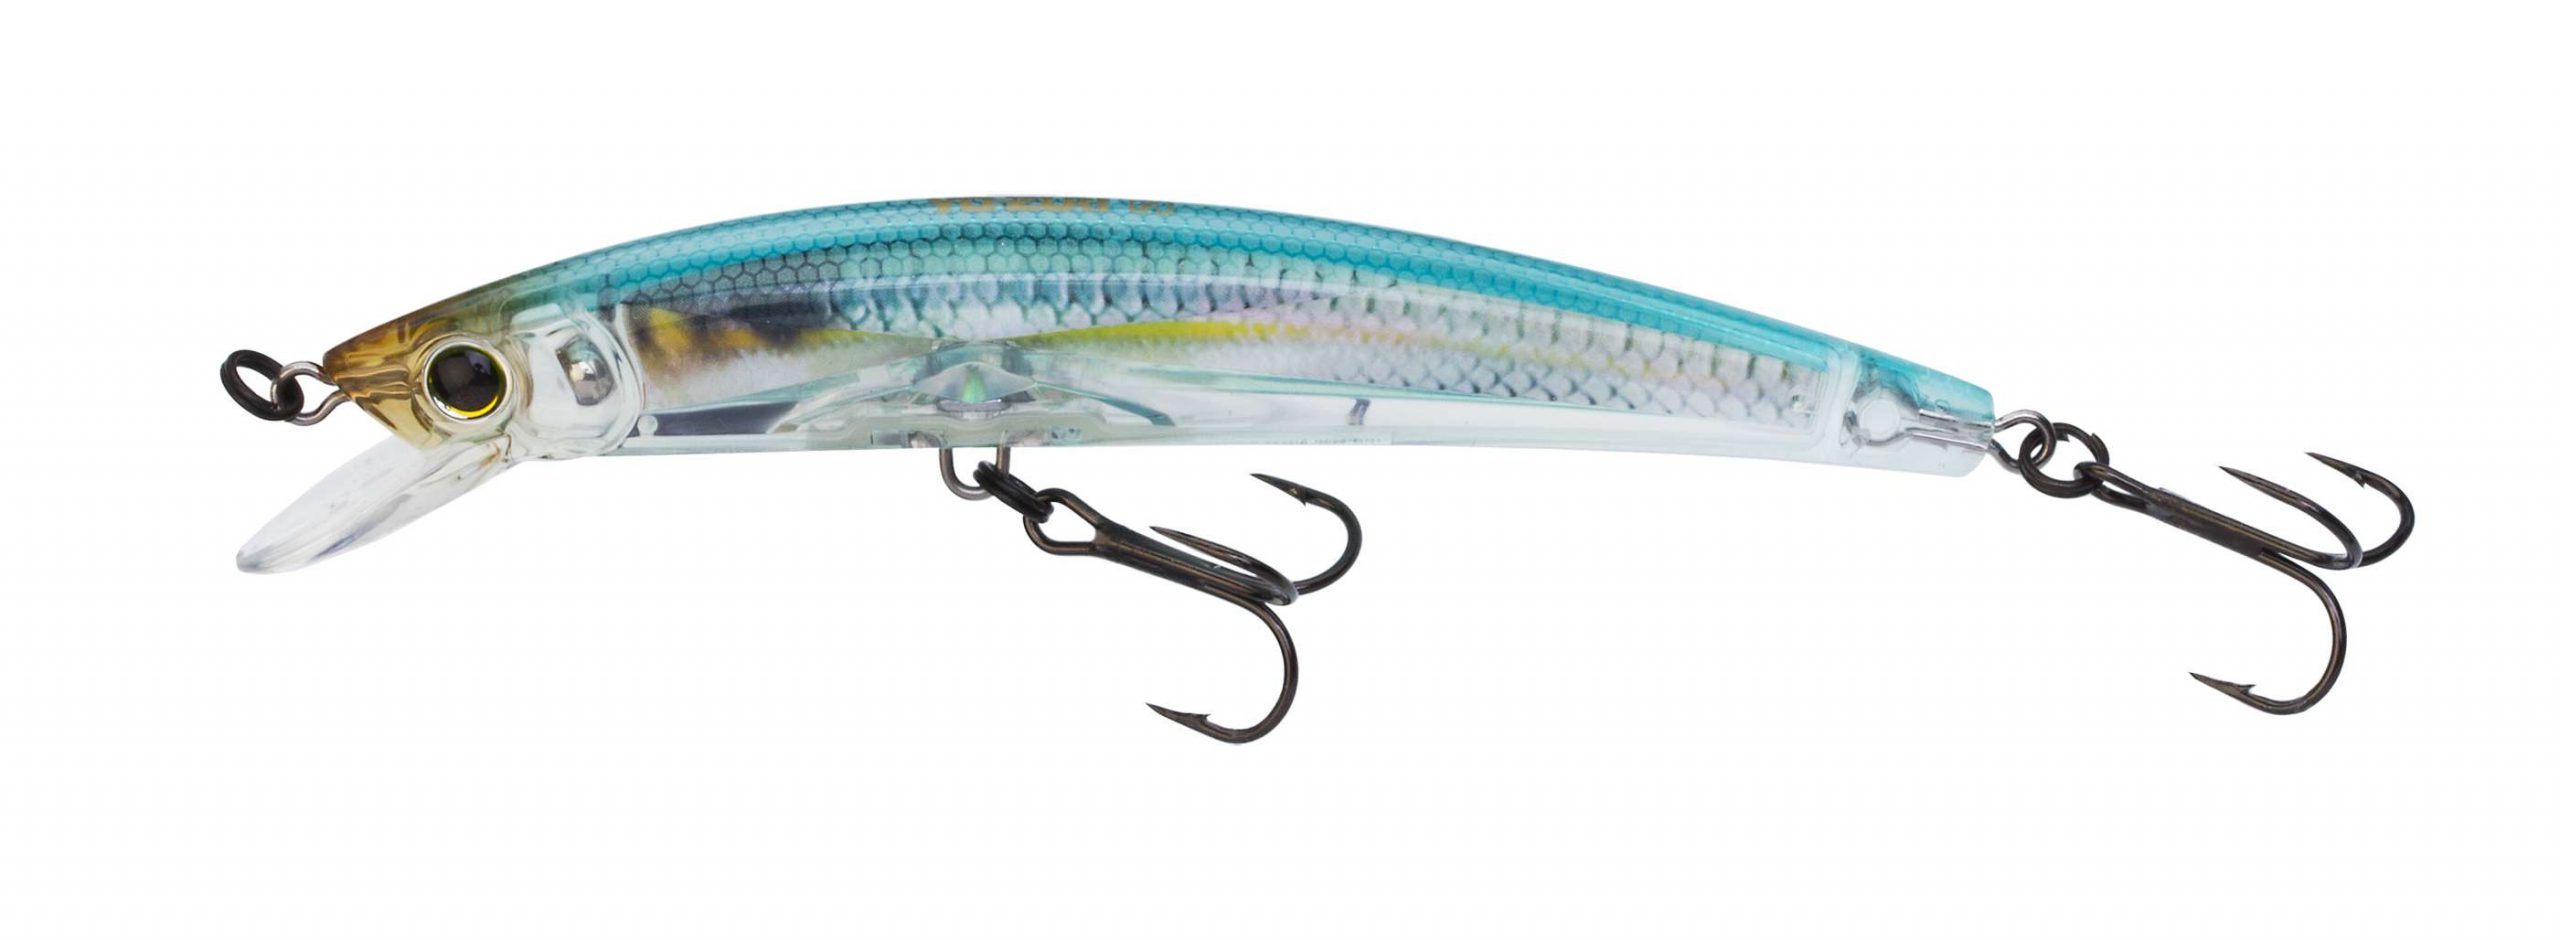 Shimano utilizes patented technologies in new addition to freshwater lure  lineup - Bassmaster